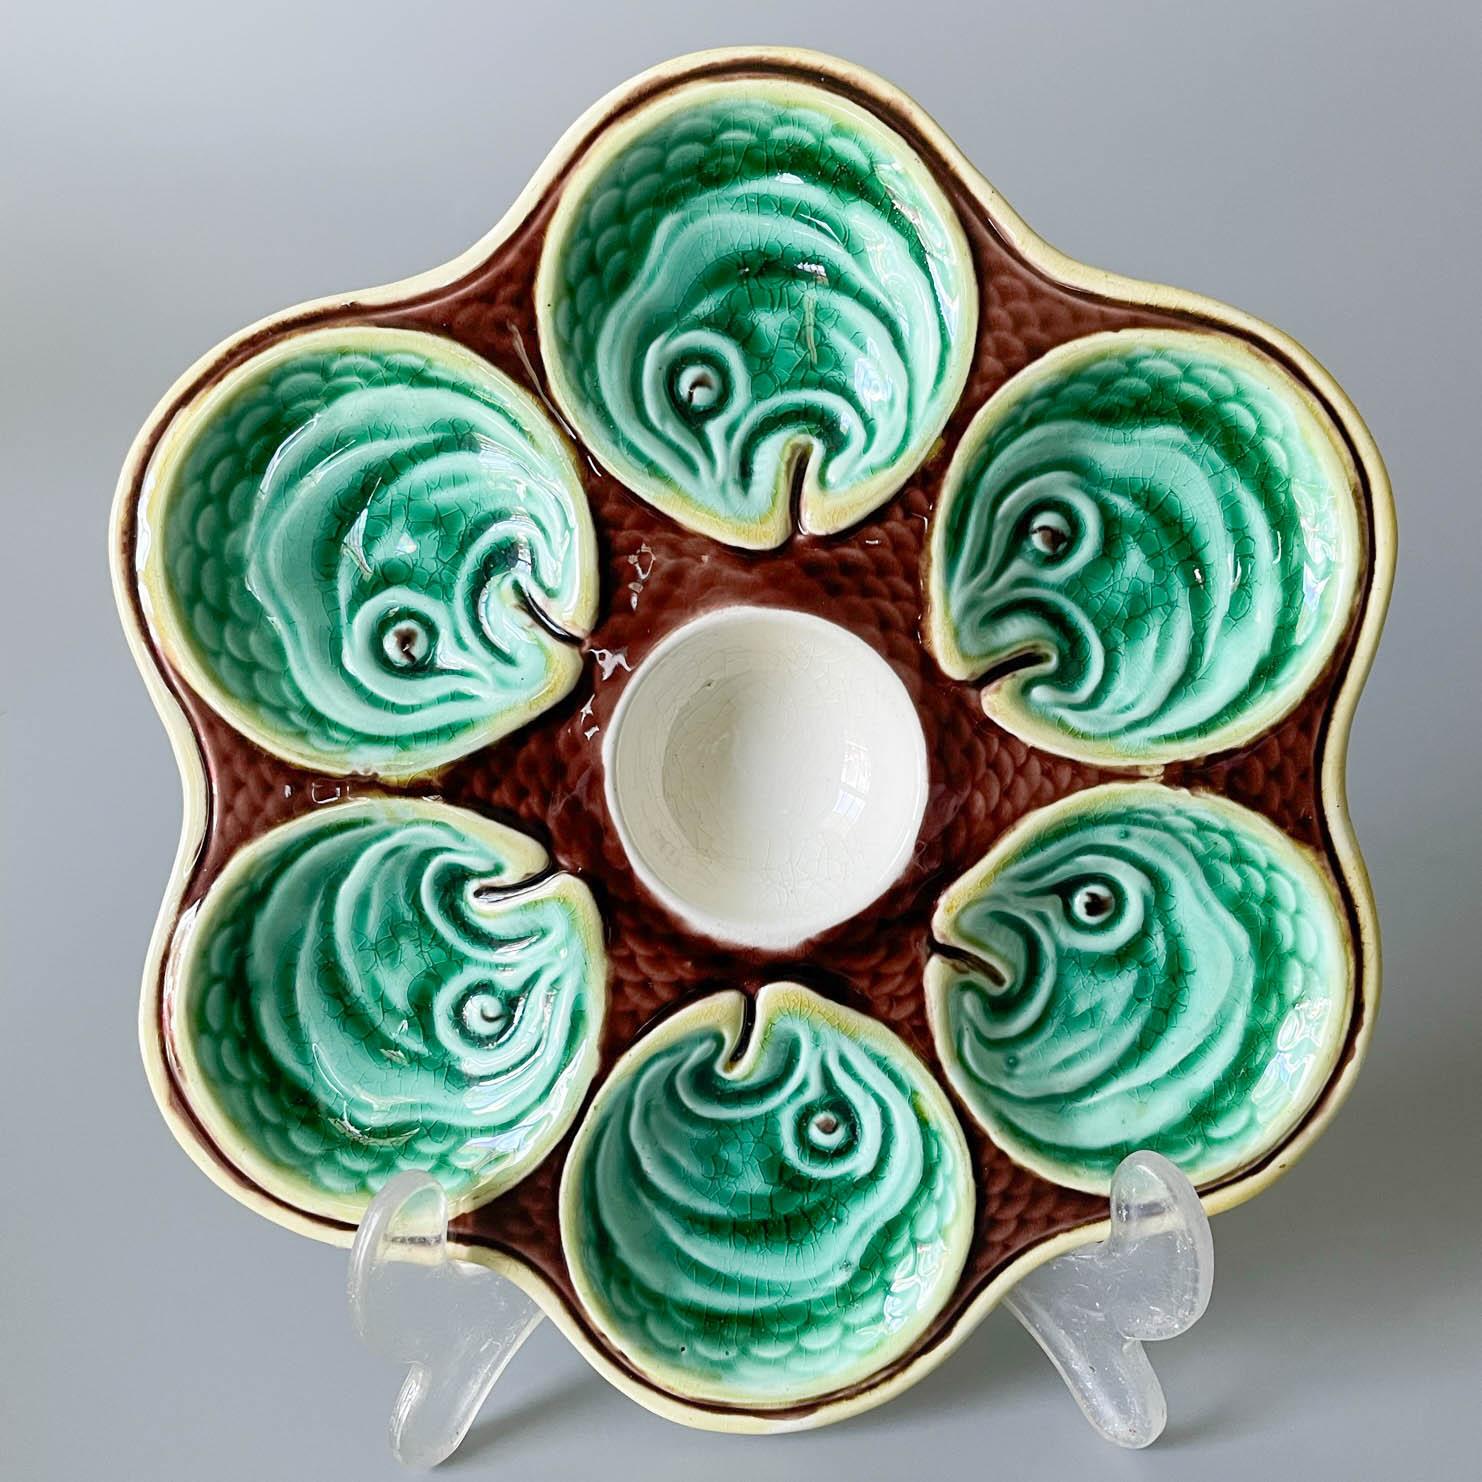 A small 19th century English Wedgwood majolica oyster plate having six wells with green fish head motif surrounding a central white well. Brown ground molded as fish scales with yellow as an accent color. Stamped Wedgwood to the underside. Circa